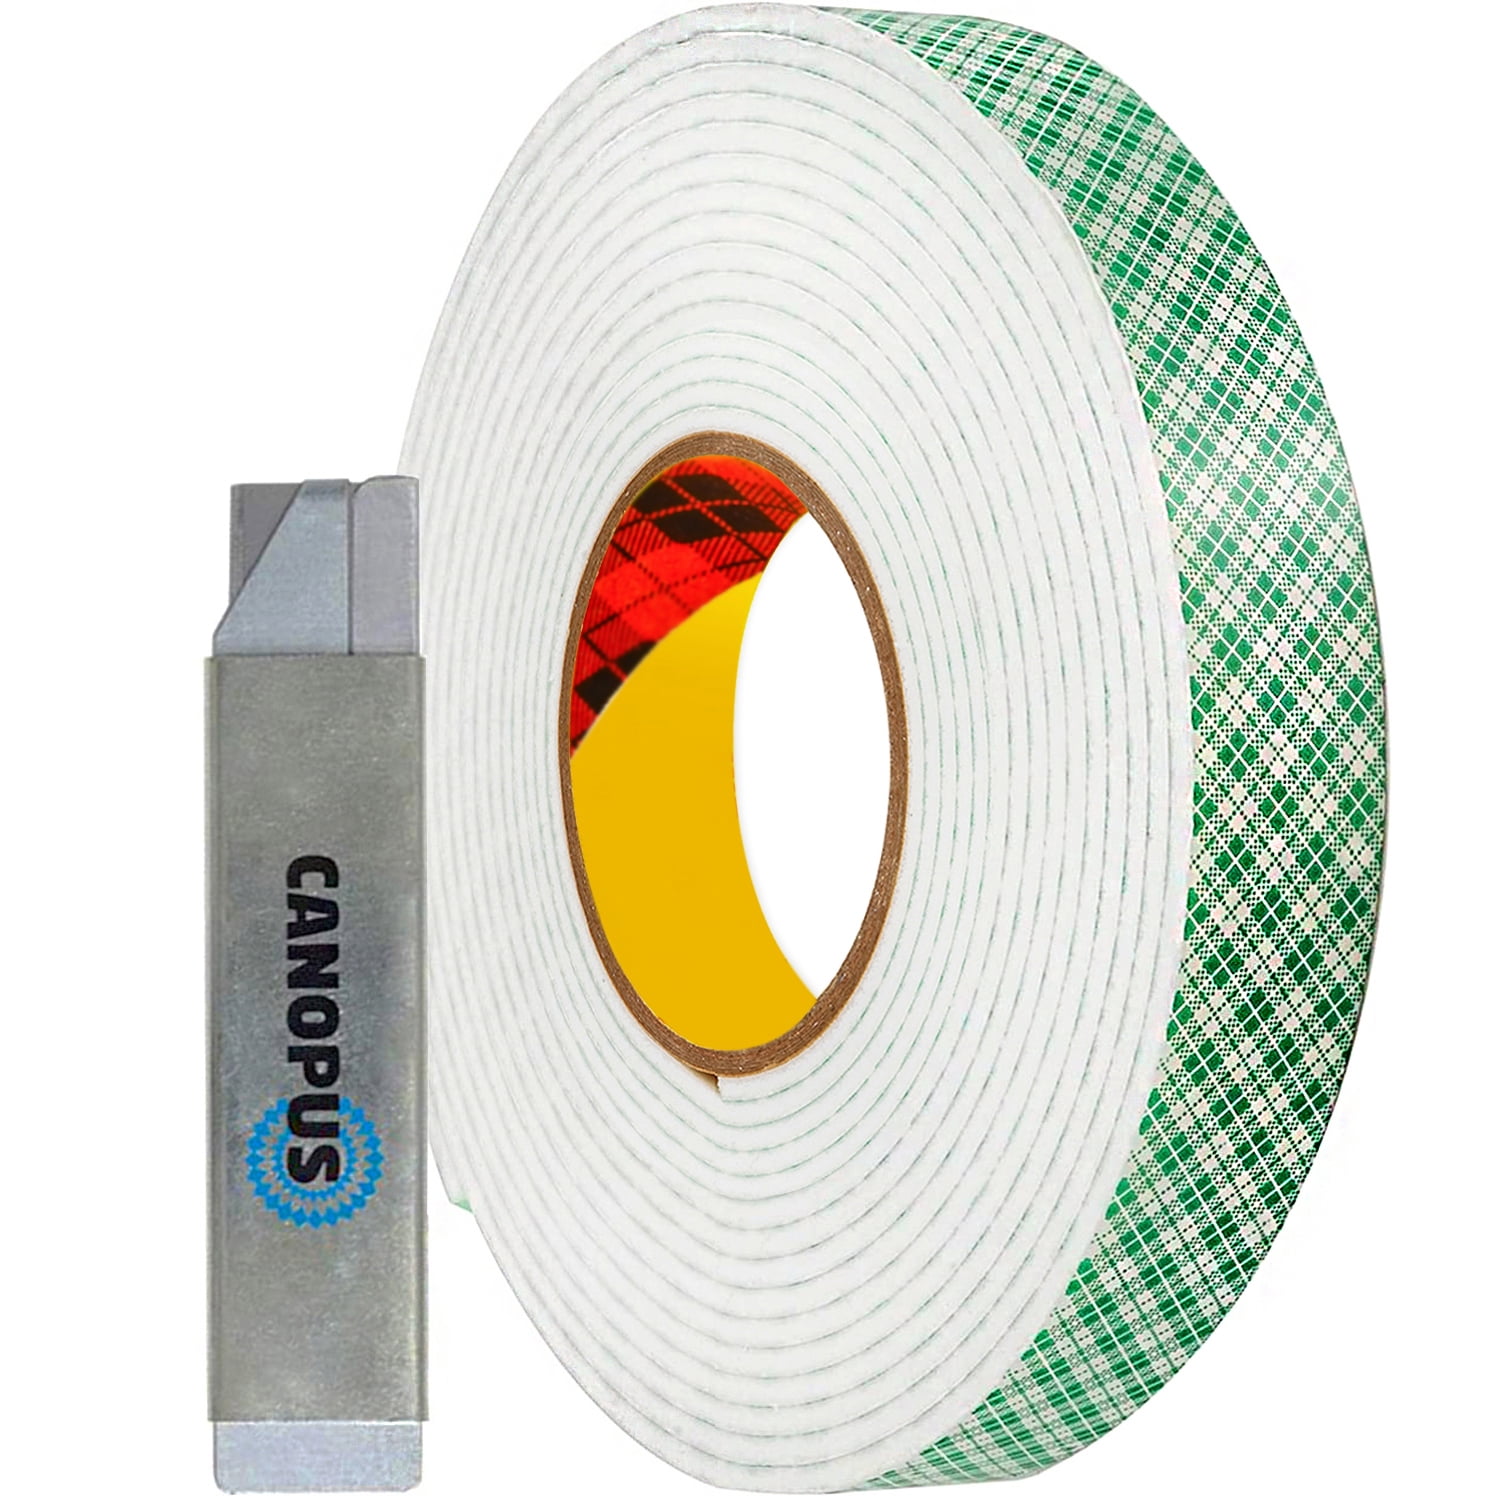 Thinp 4 Rolls Double Sided Tape for Crafts, 8mm Double Sided Adhesive Tape  Sticky Tape Craft Tape Art Tape for Scrapbooking Card Making Gift Wrapping